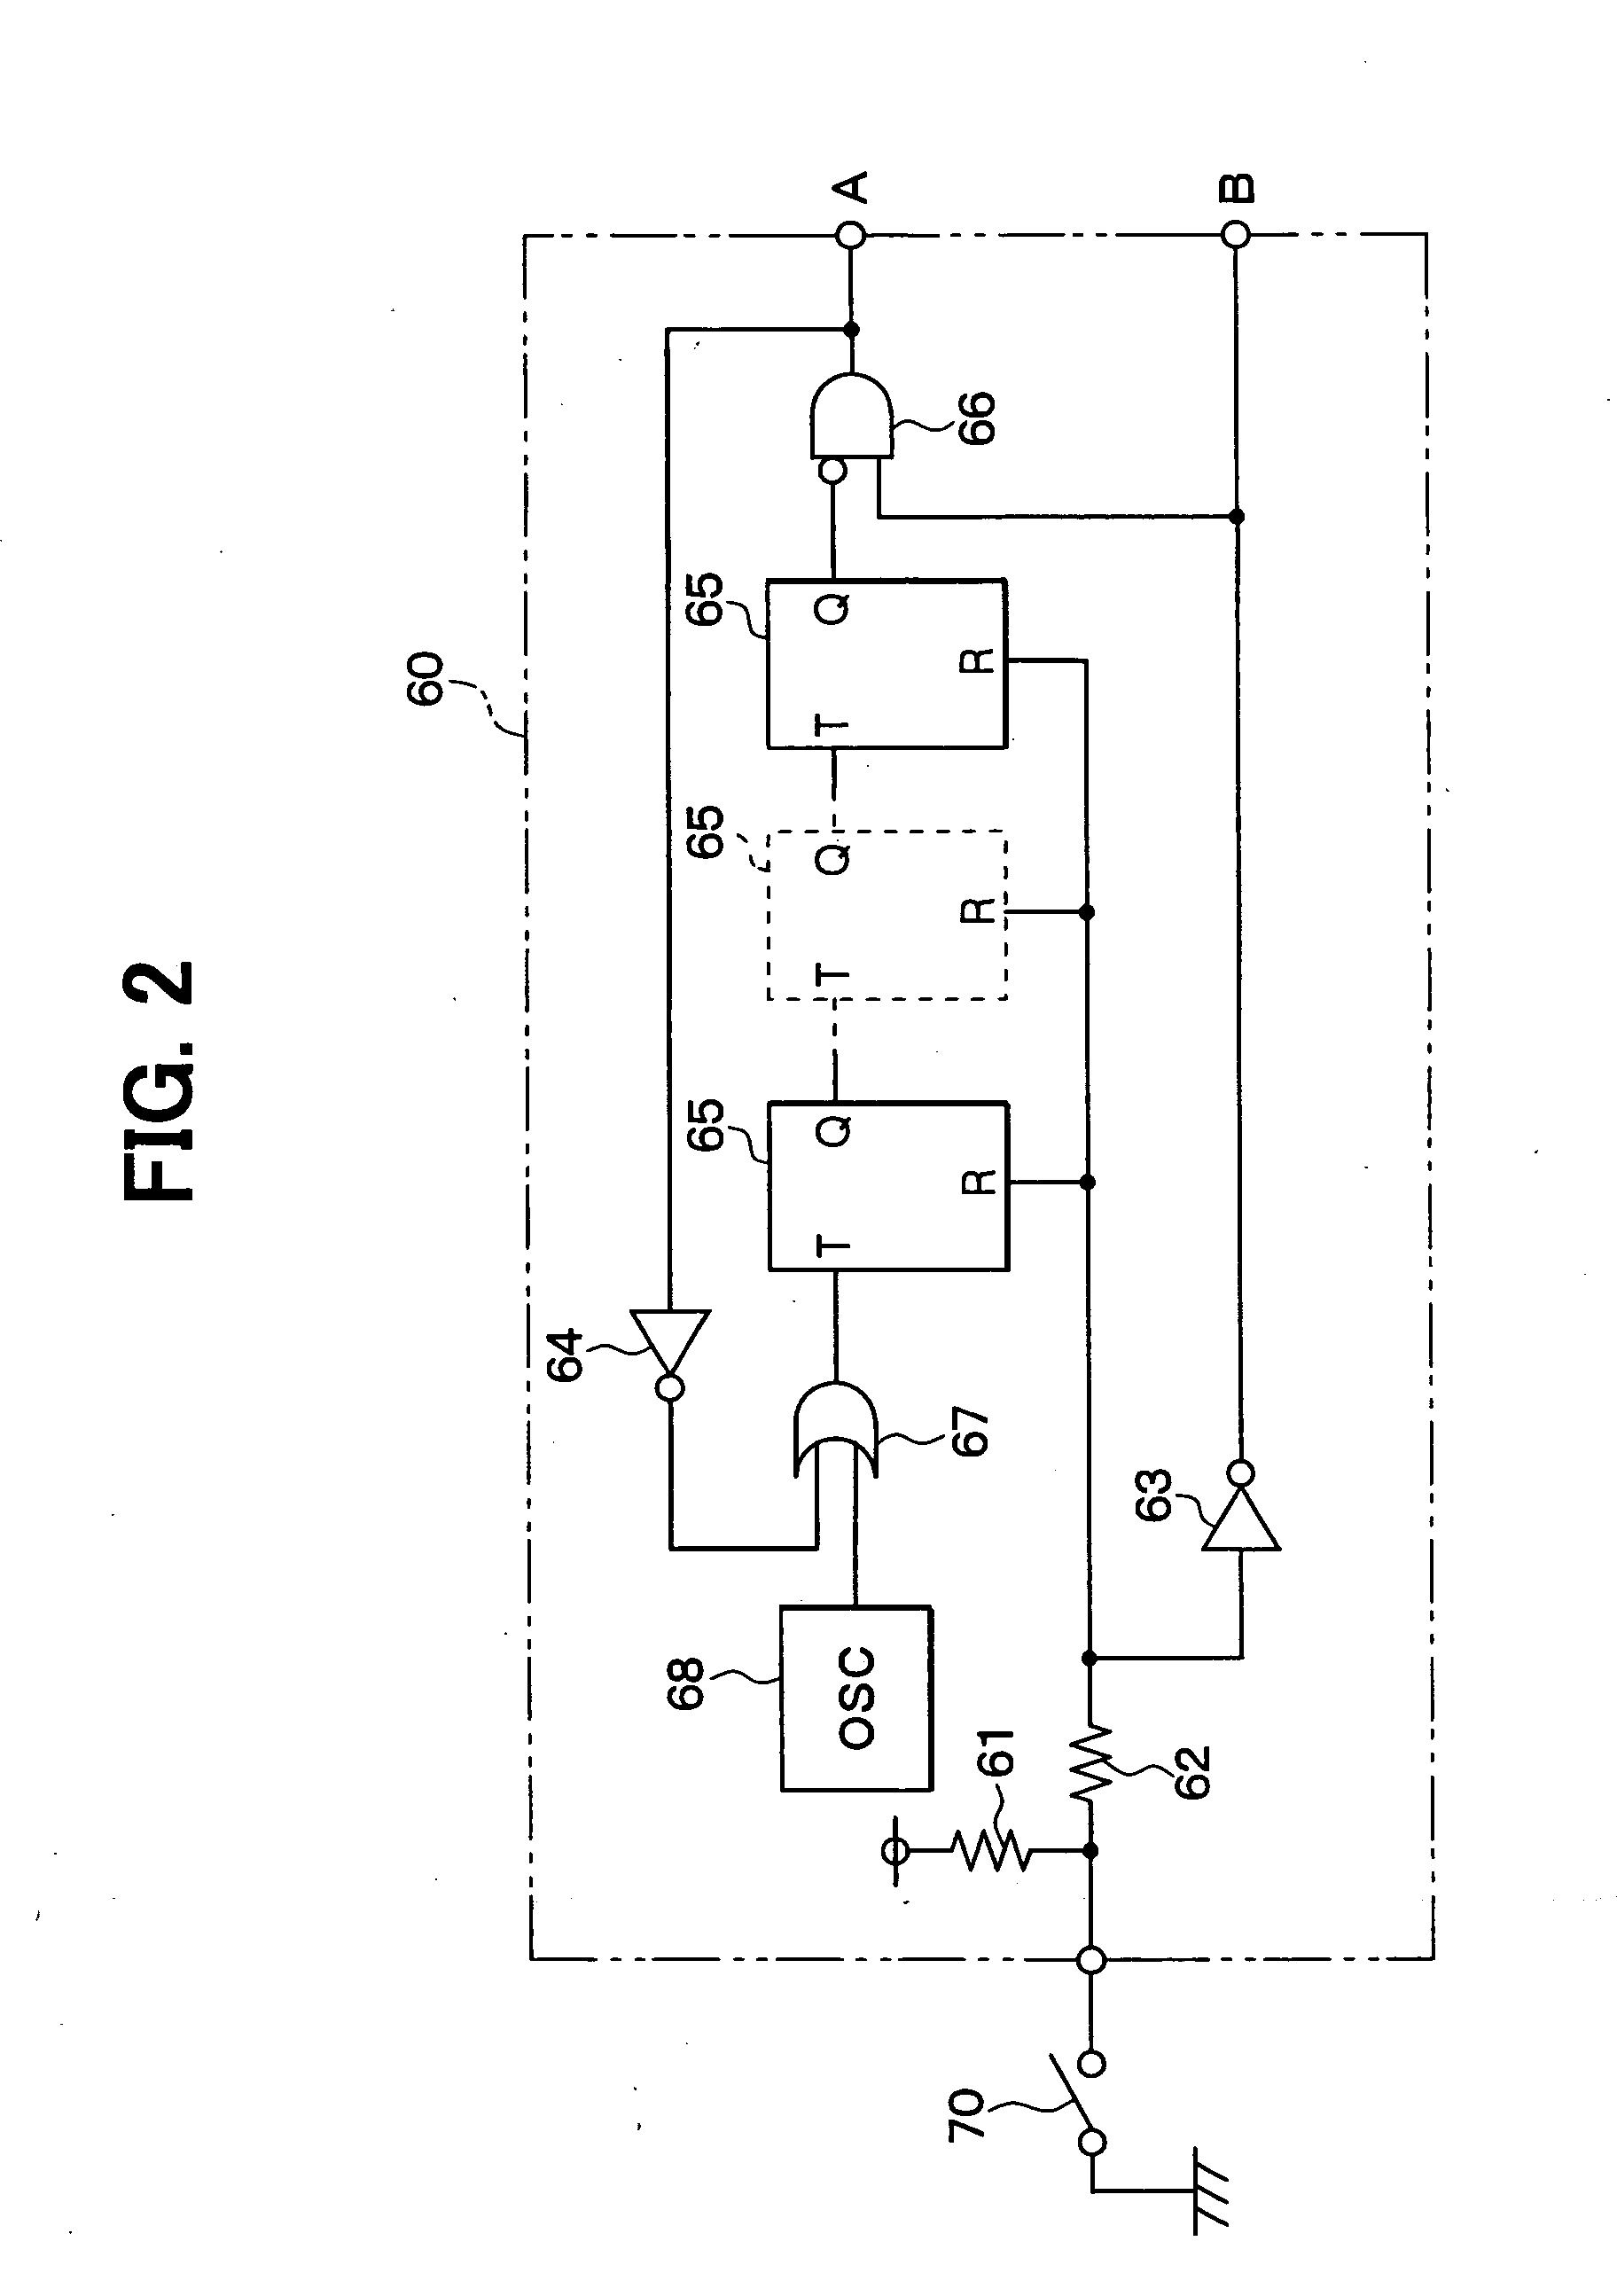 Constant current relay drive circuit